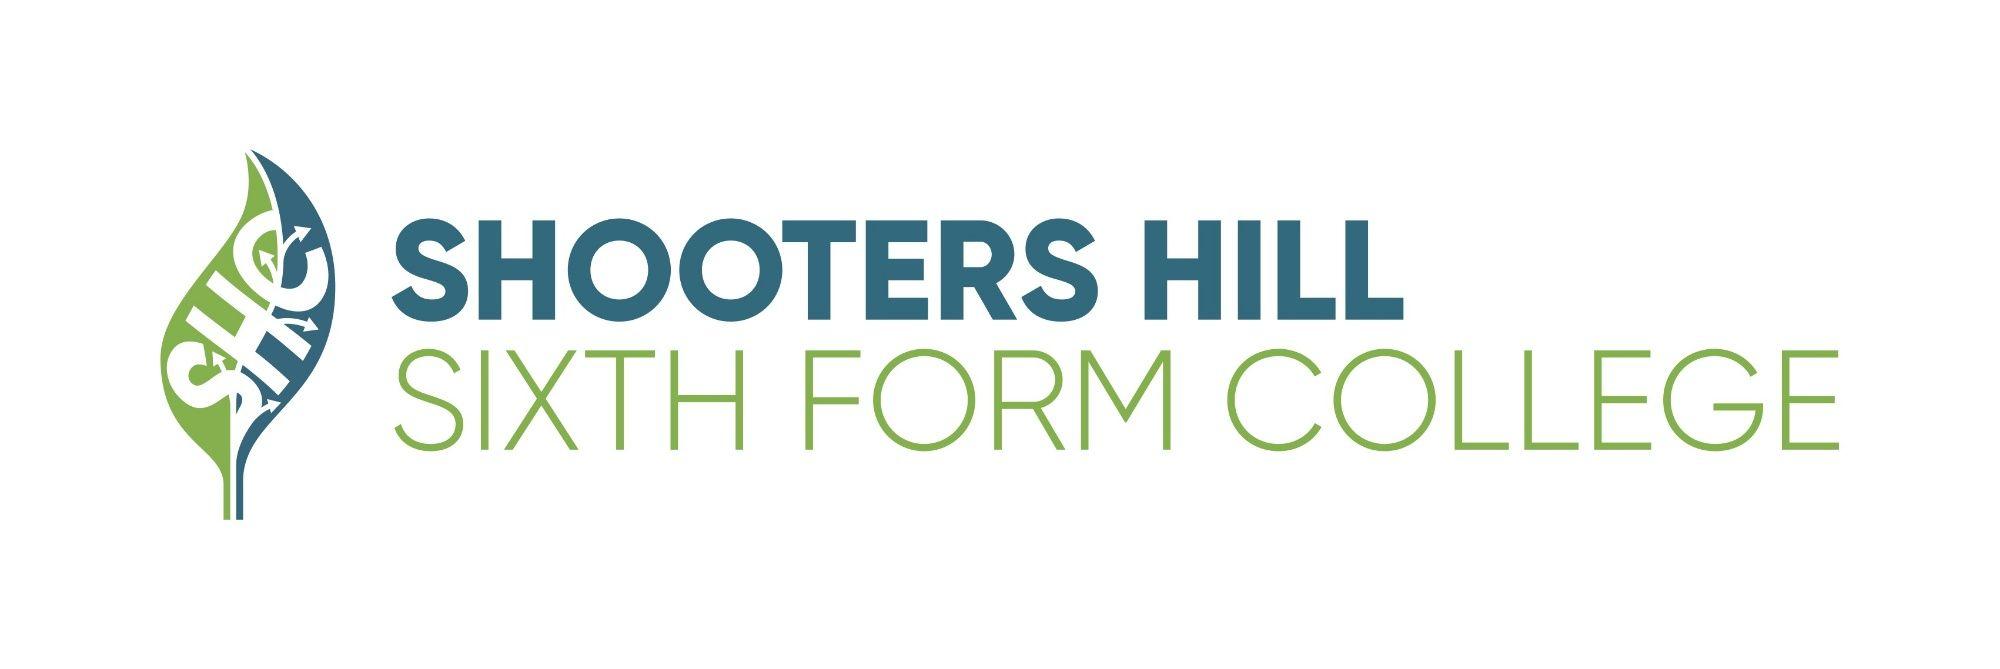 Hill College Logo - Shooters Hill Sixth Form College - SHC Logo